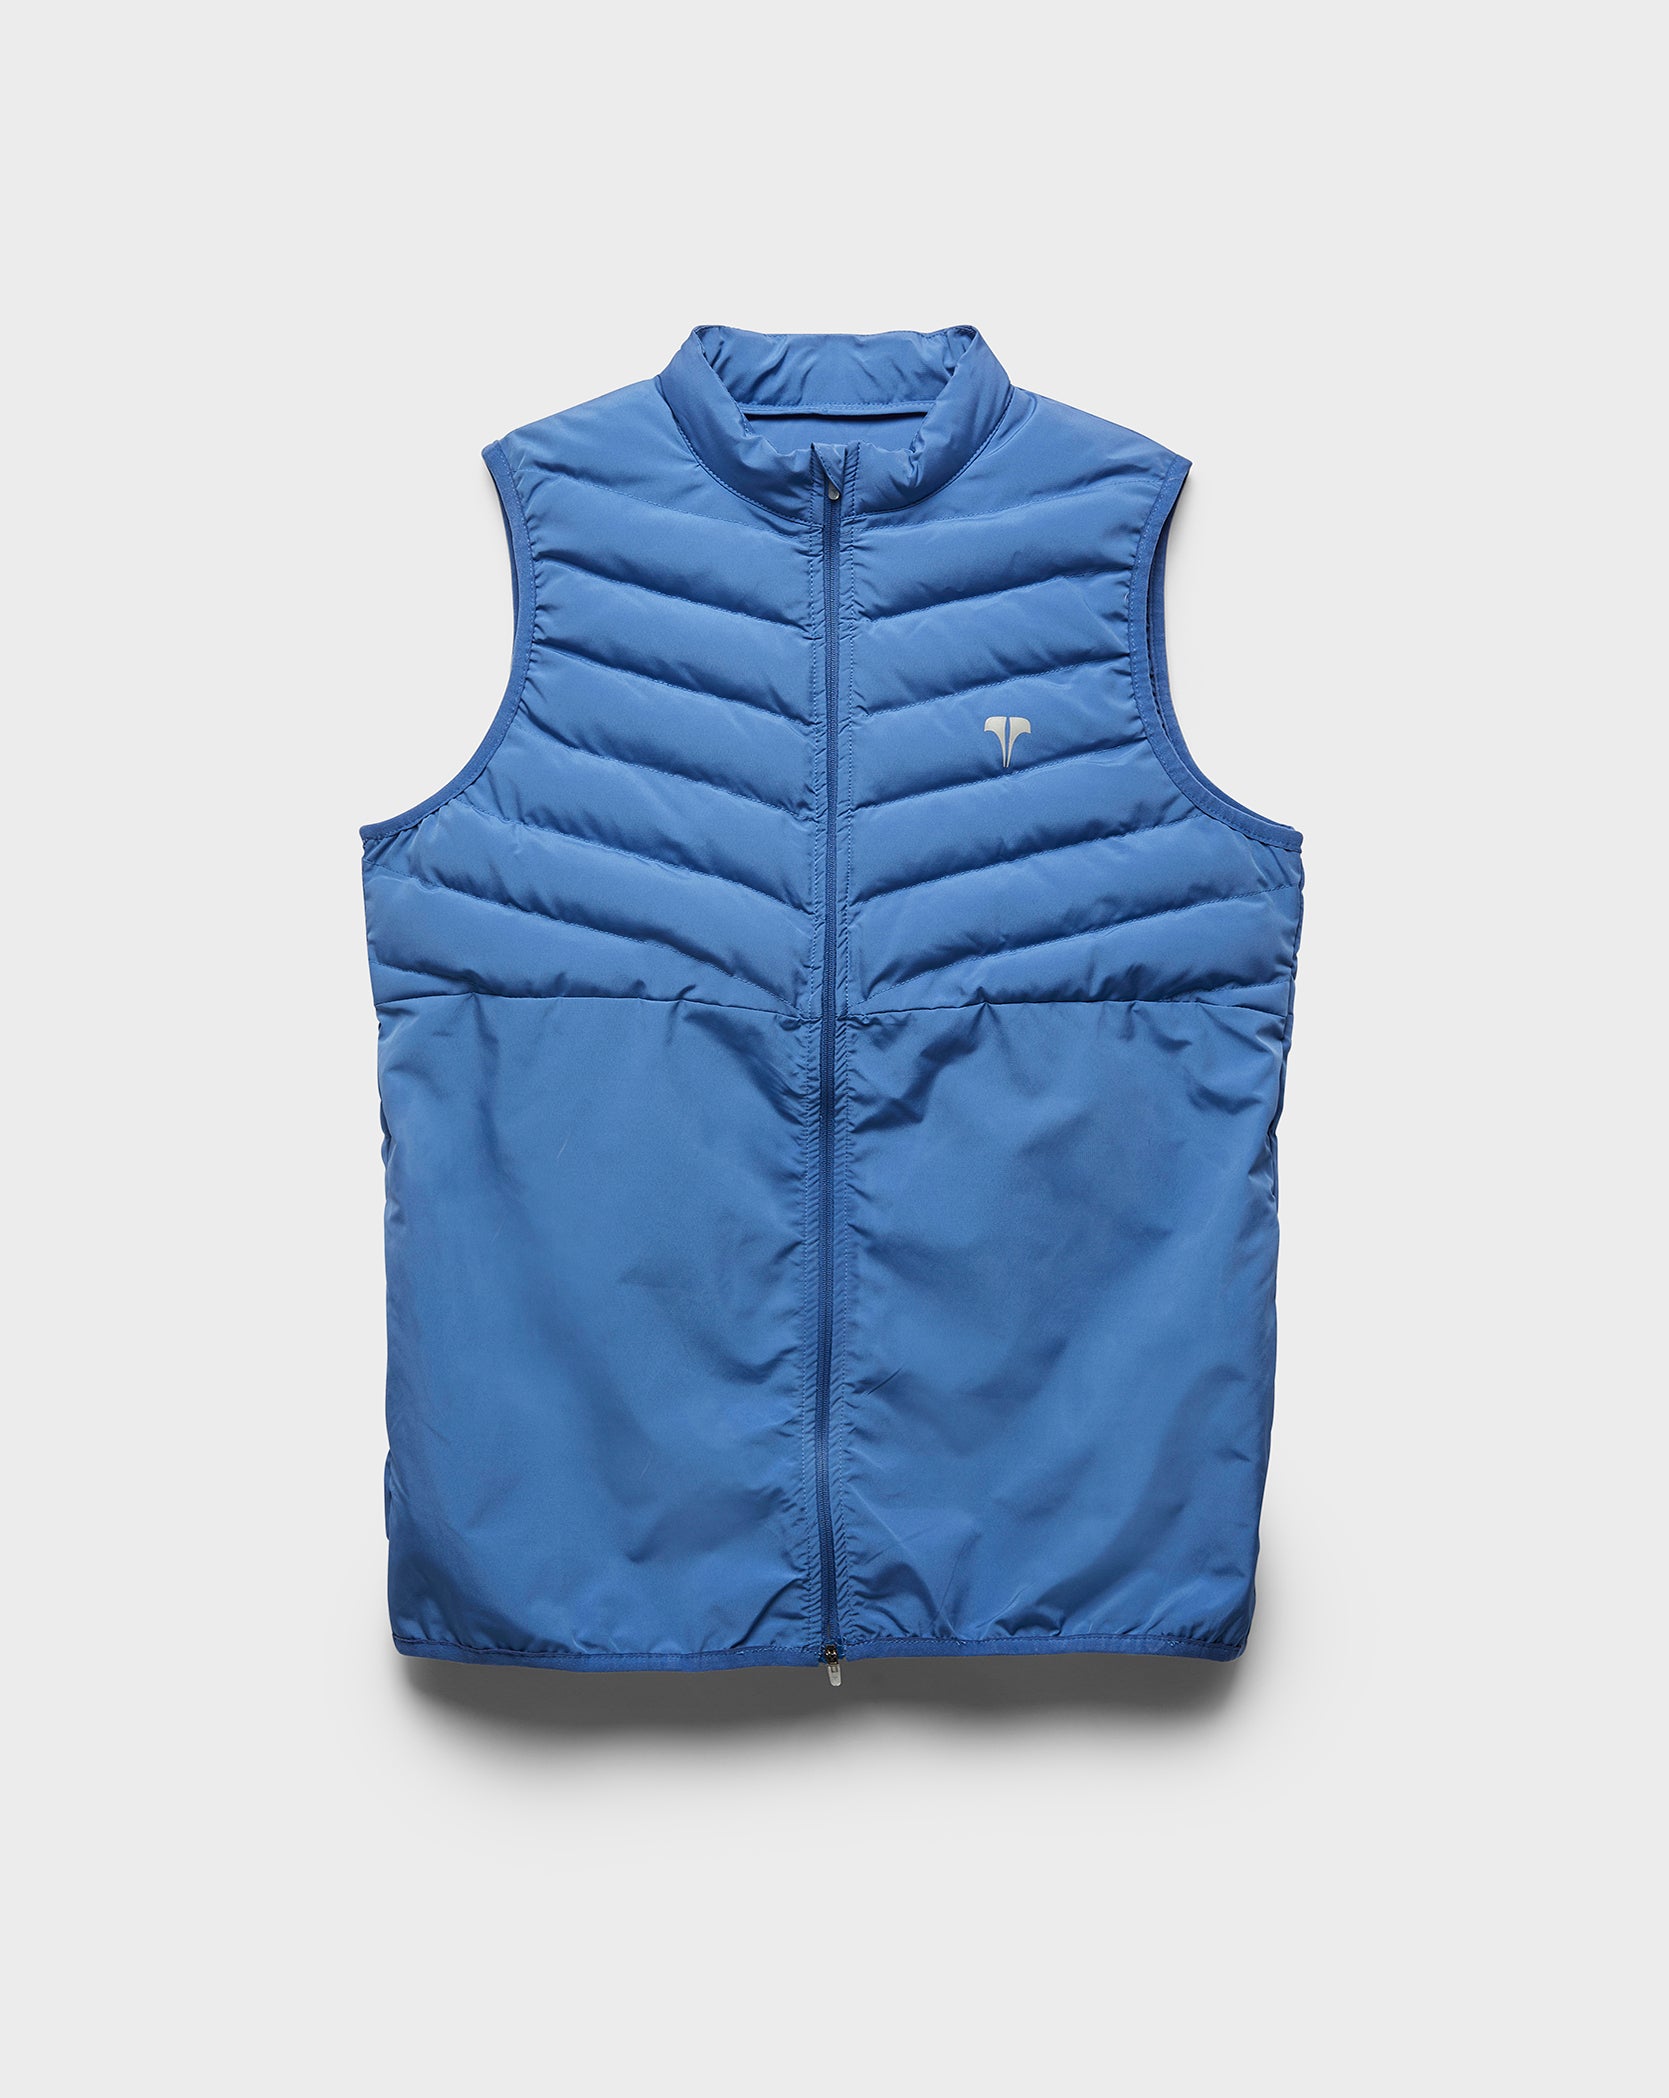 Twinzz active blue gilet front